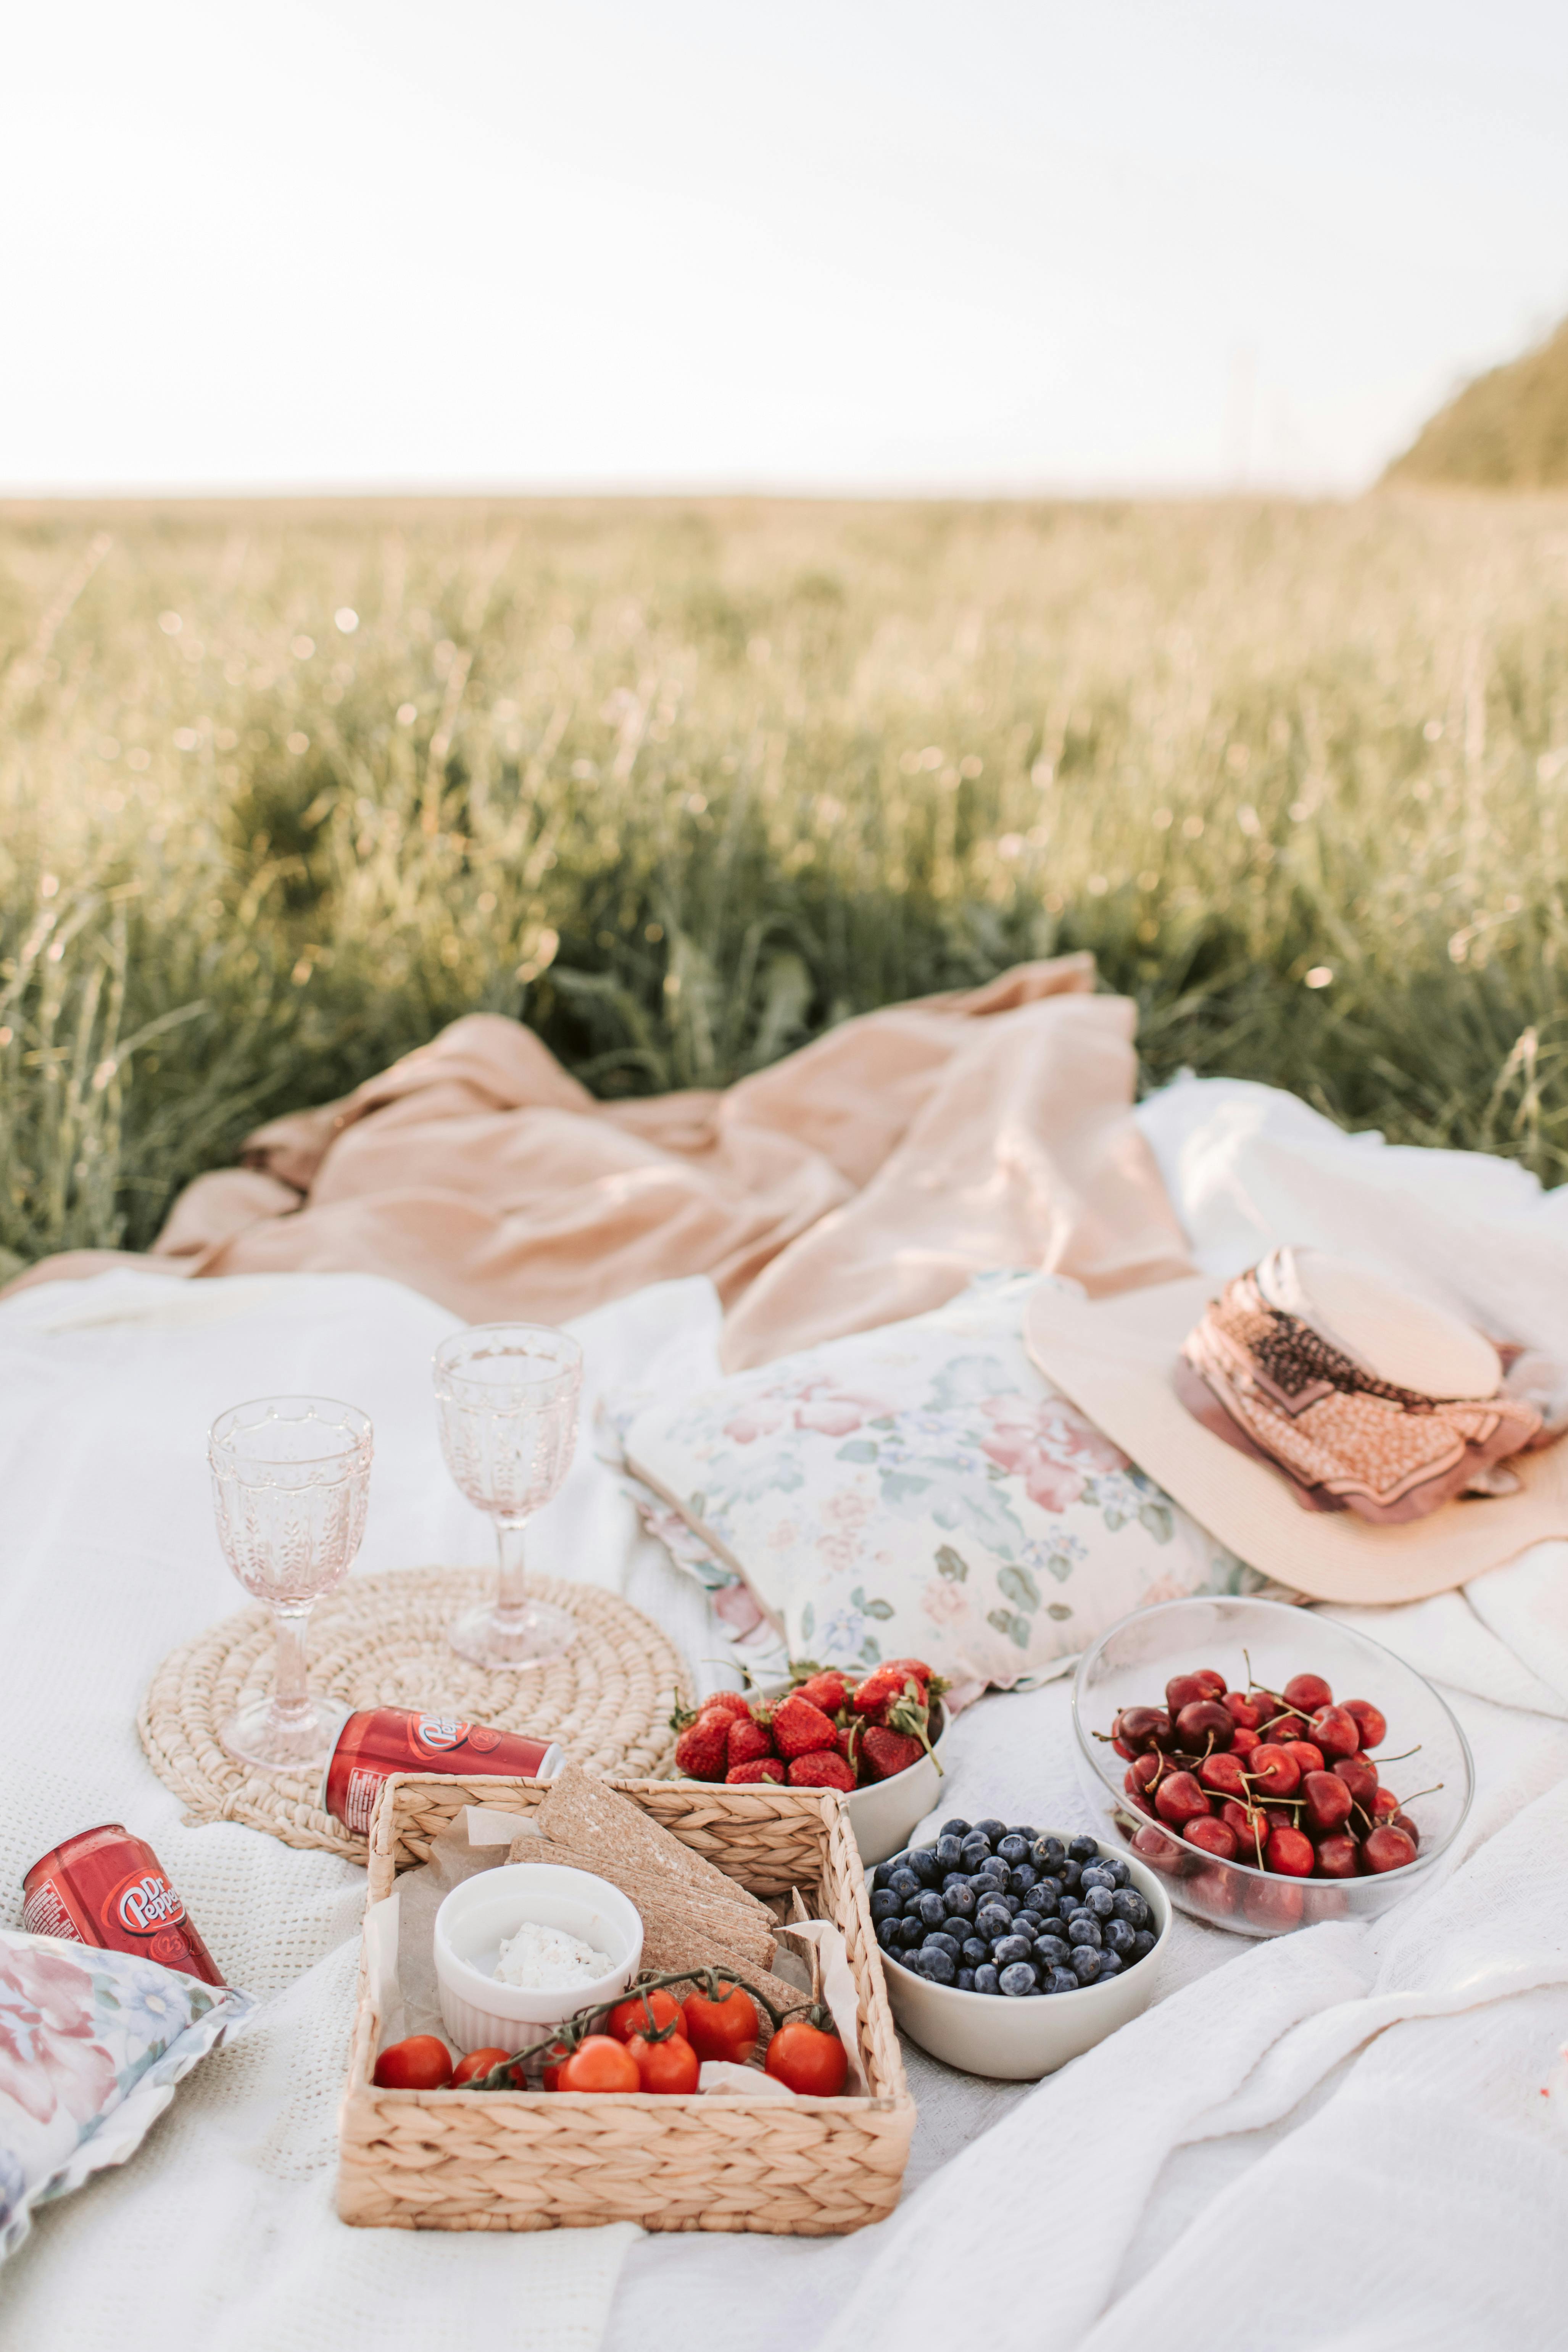 40+ Picnic Aesthetic Wallpaper To Give Your Inspiration! - Prada & Pearls |  Beach picnic, Picnic images, Beach picnic party